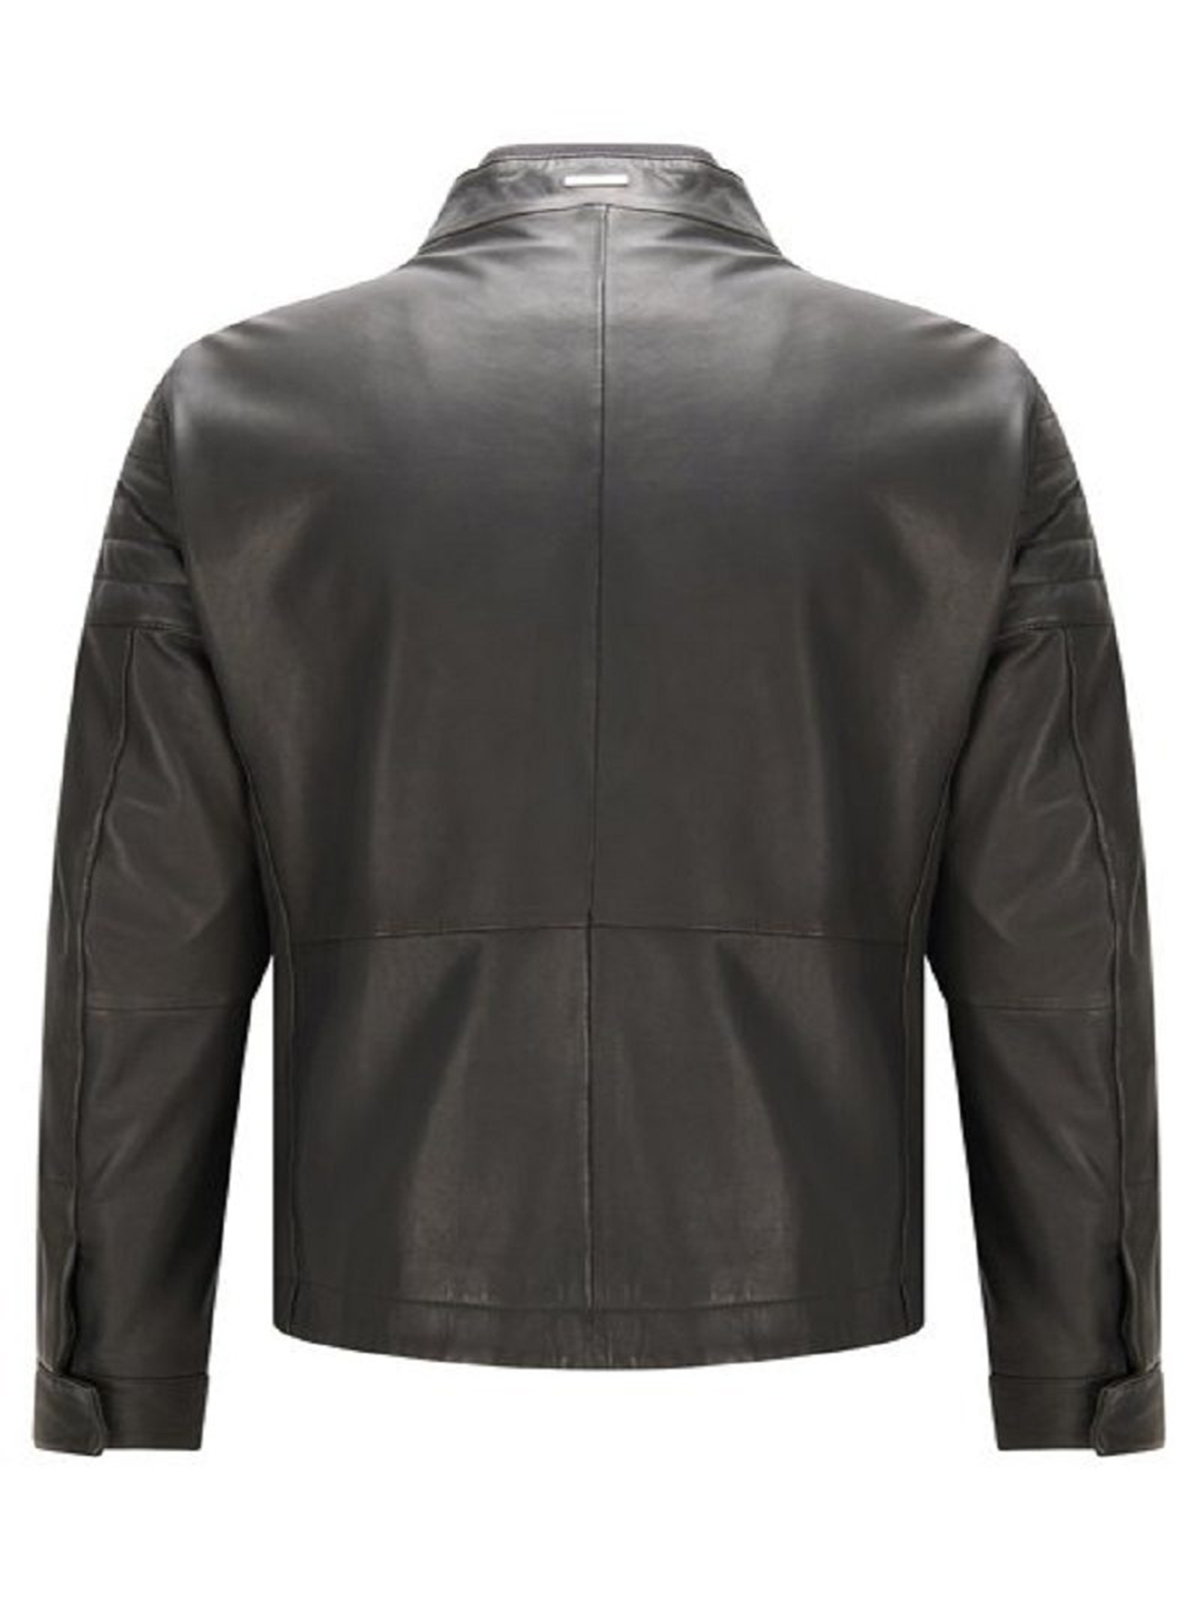 BOSS - Regular-fit jacket in textured soft-touch leather